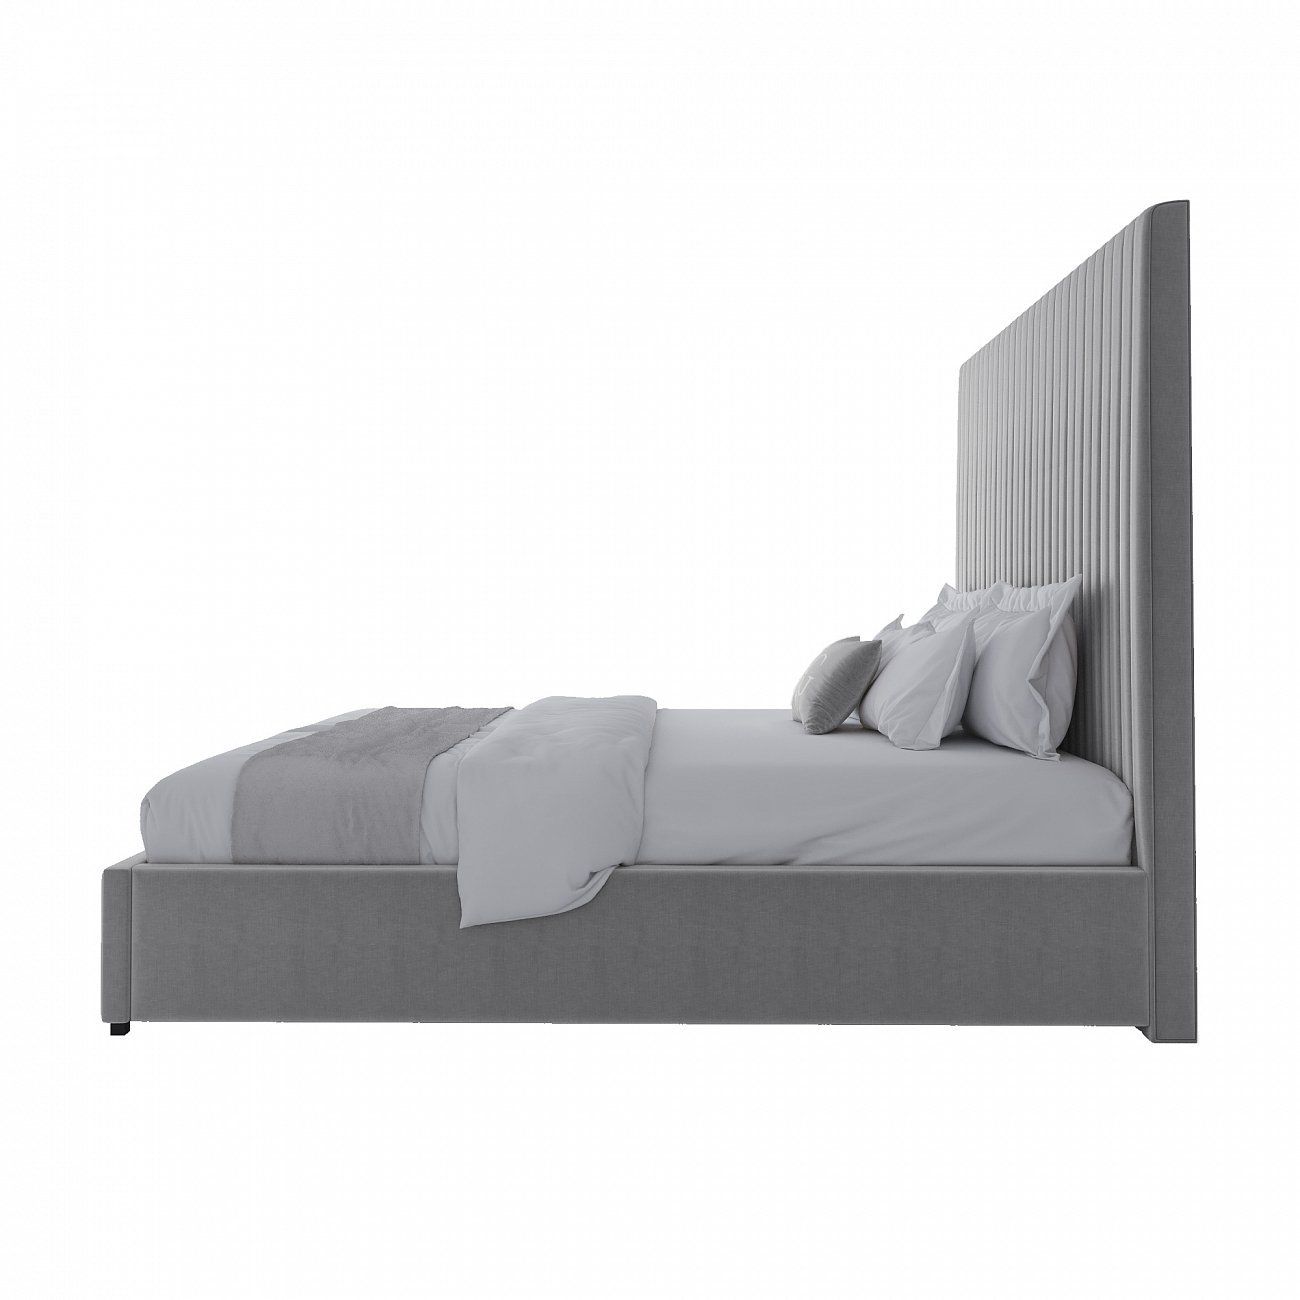 Double bed with upholstered headboard 180x200 cm light gray Mora